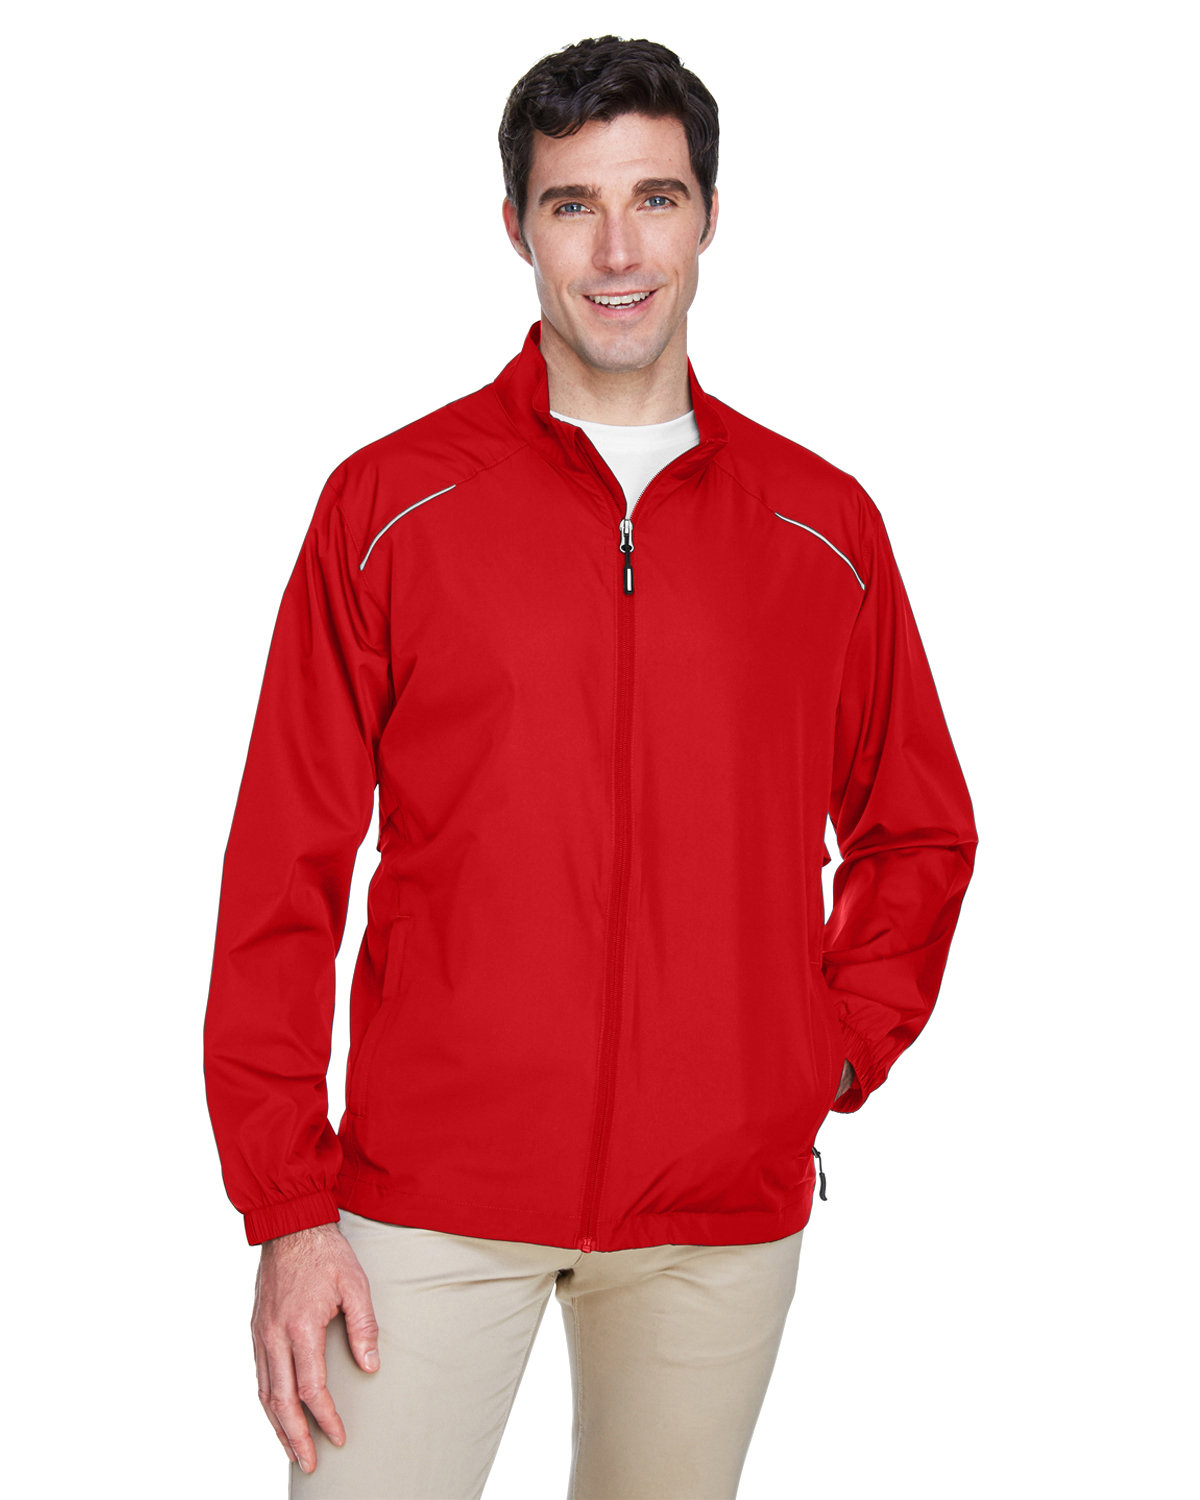 Core 365 Men's Tall Techno Lite Motivate Unlined Lightweight Jacket CLASSIC RED 